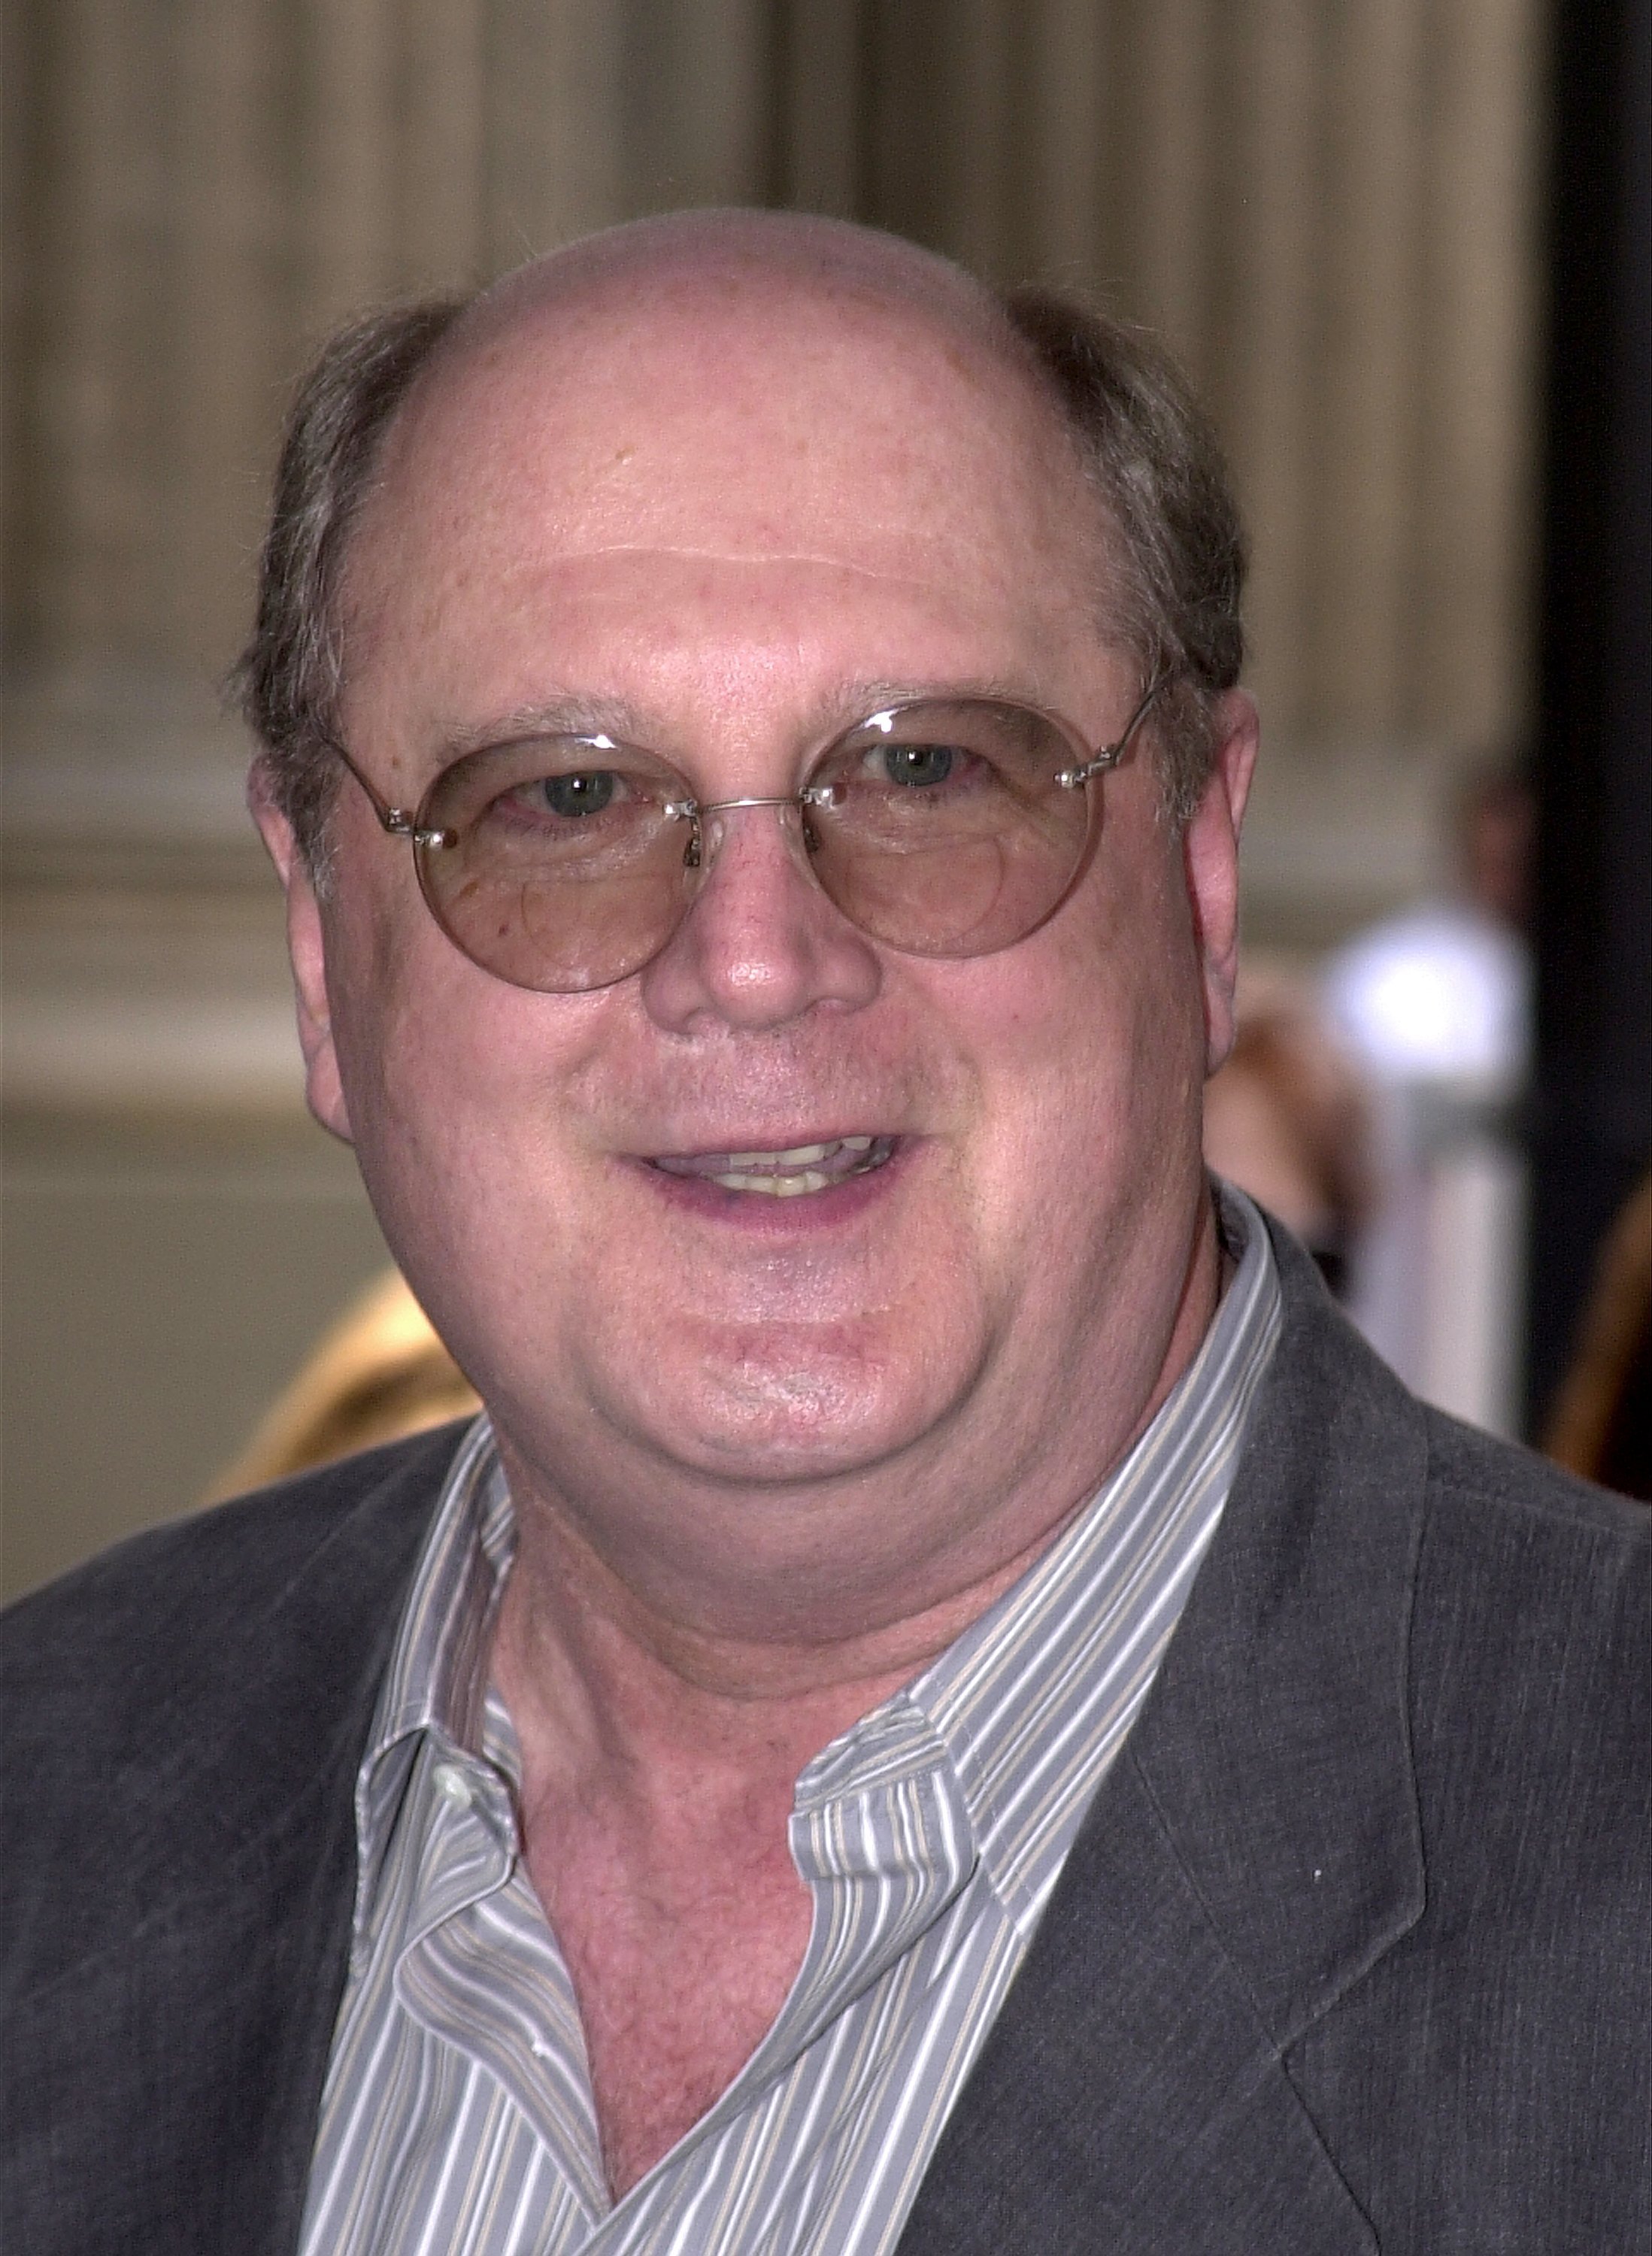 David Ogden Stiers on June 3, 2001 in Hollywood, California | Source: Getty Images